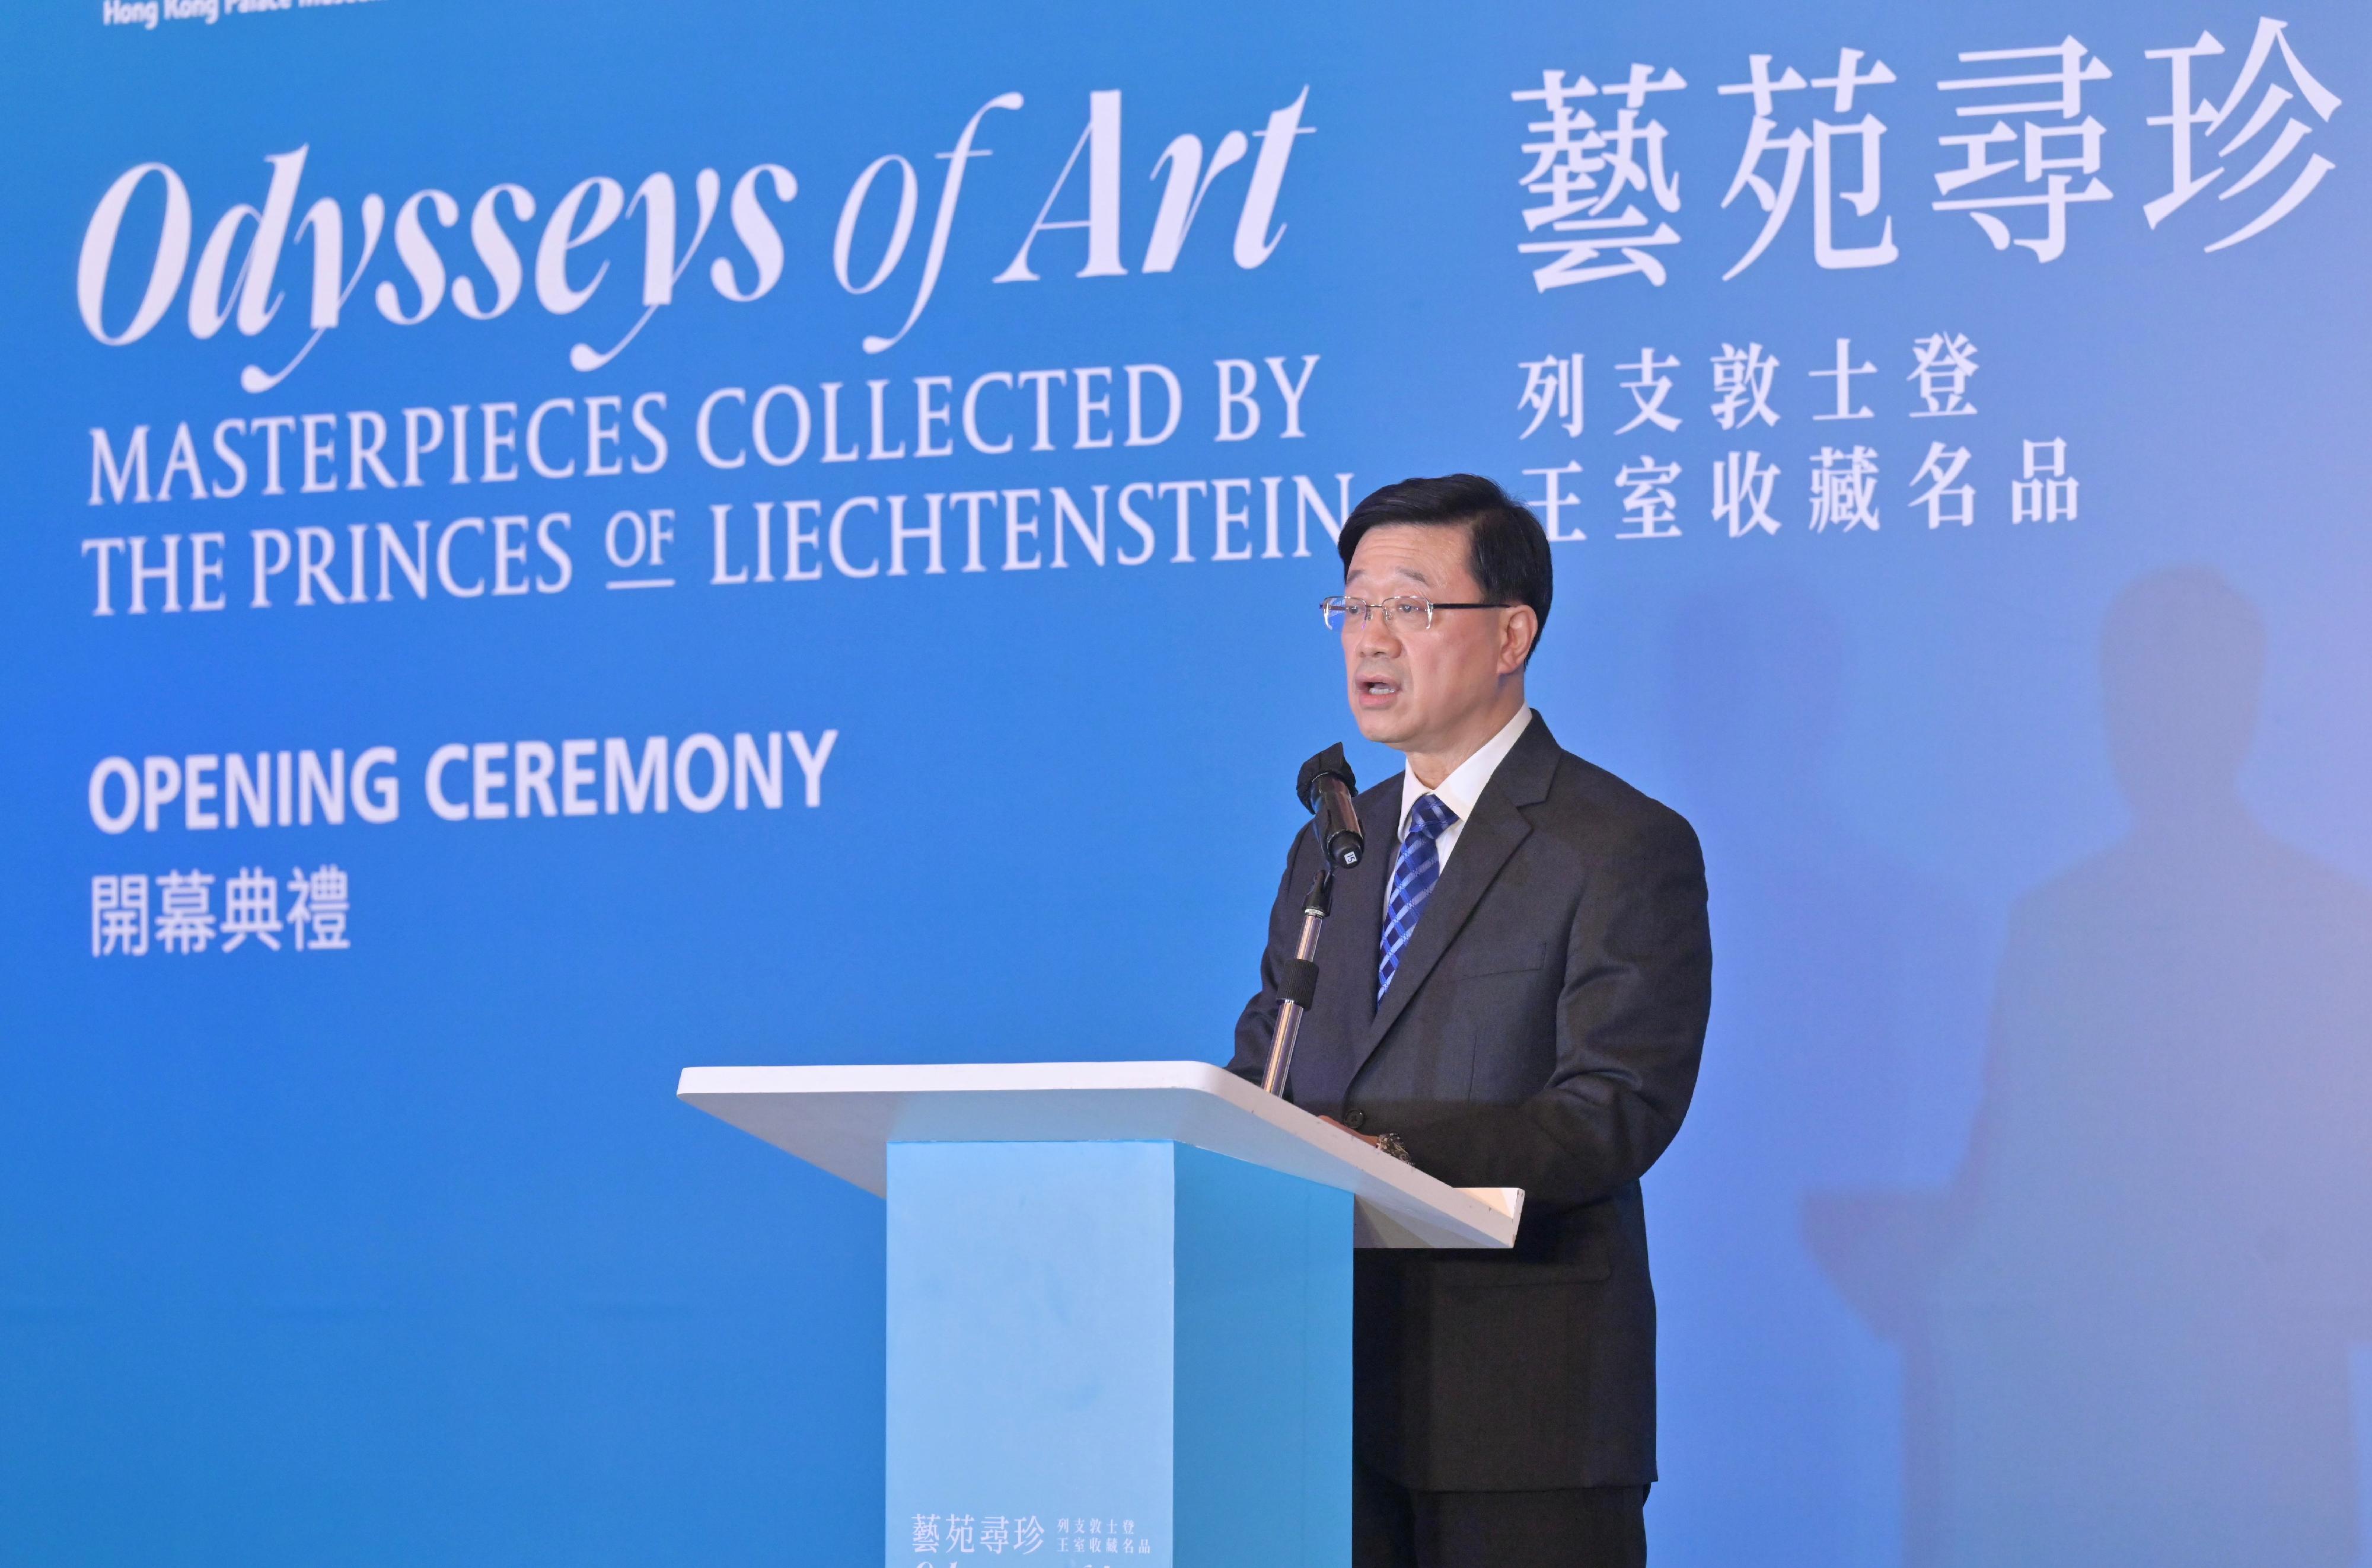 The Chief Executive, Mr John Lee, speaks at the opening ceremony of "Odysseys of Art: Masterpieces Collected by the Princes of Liechtenstein" today (November 8). 